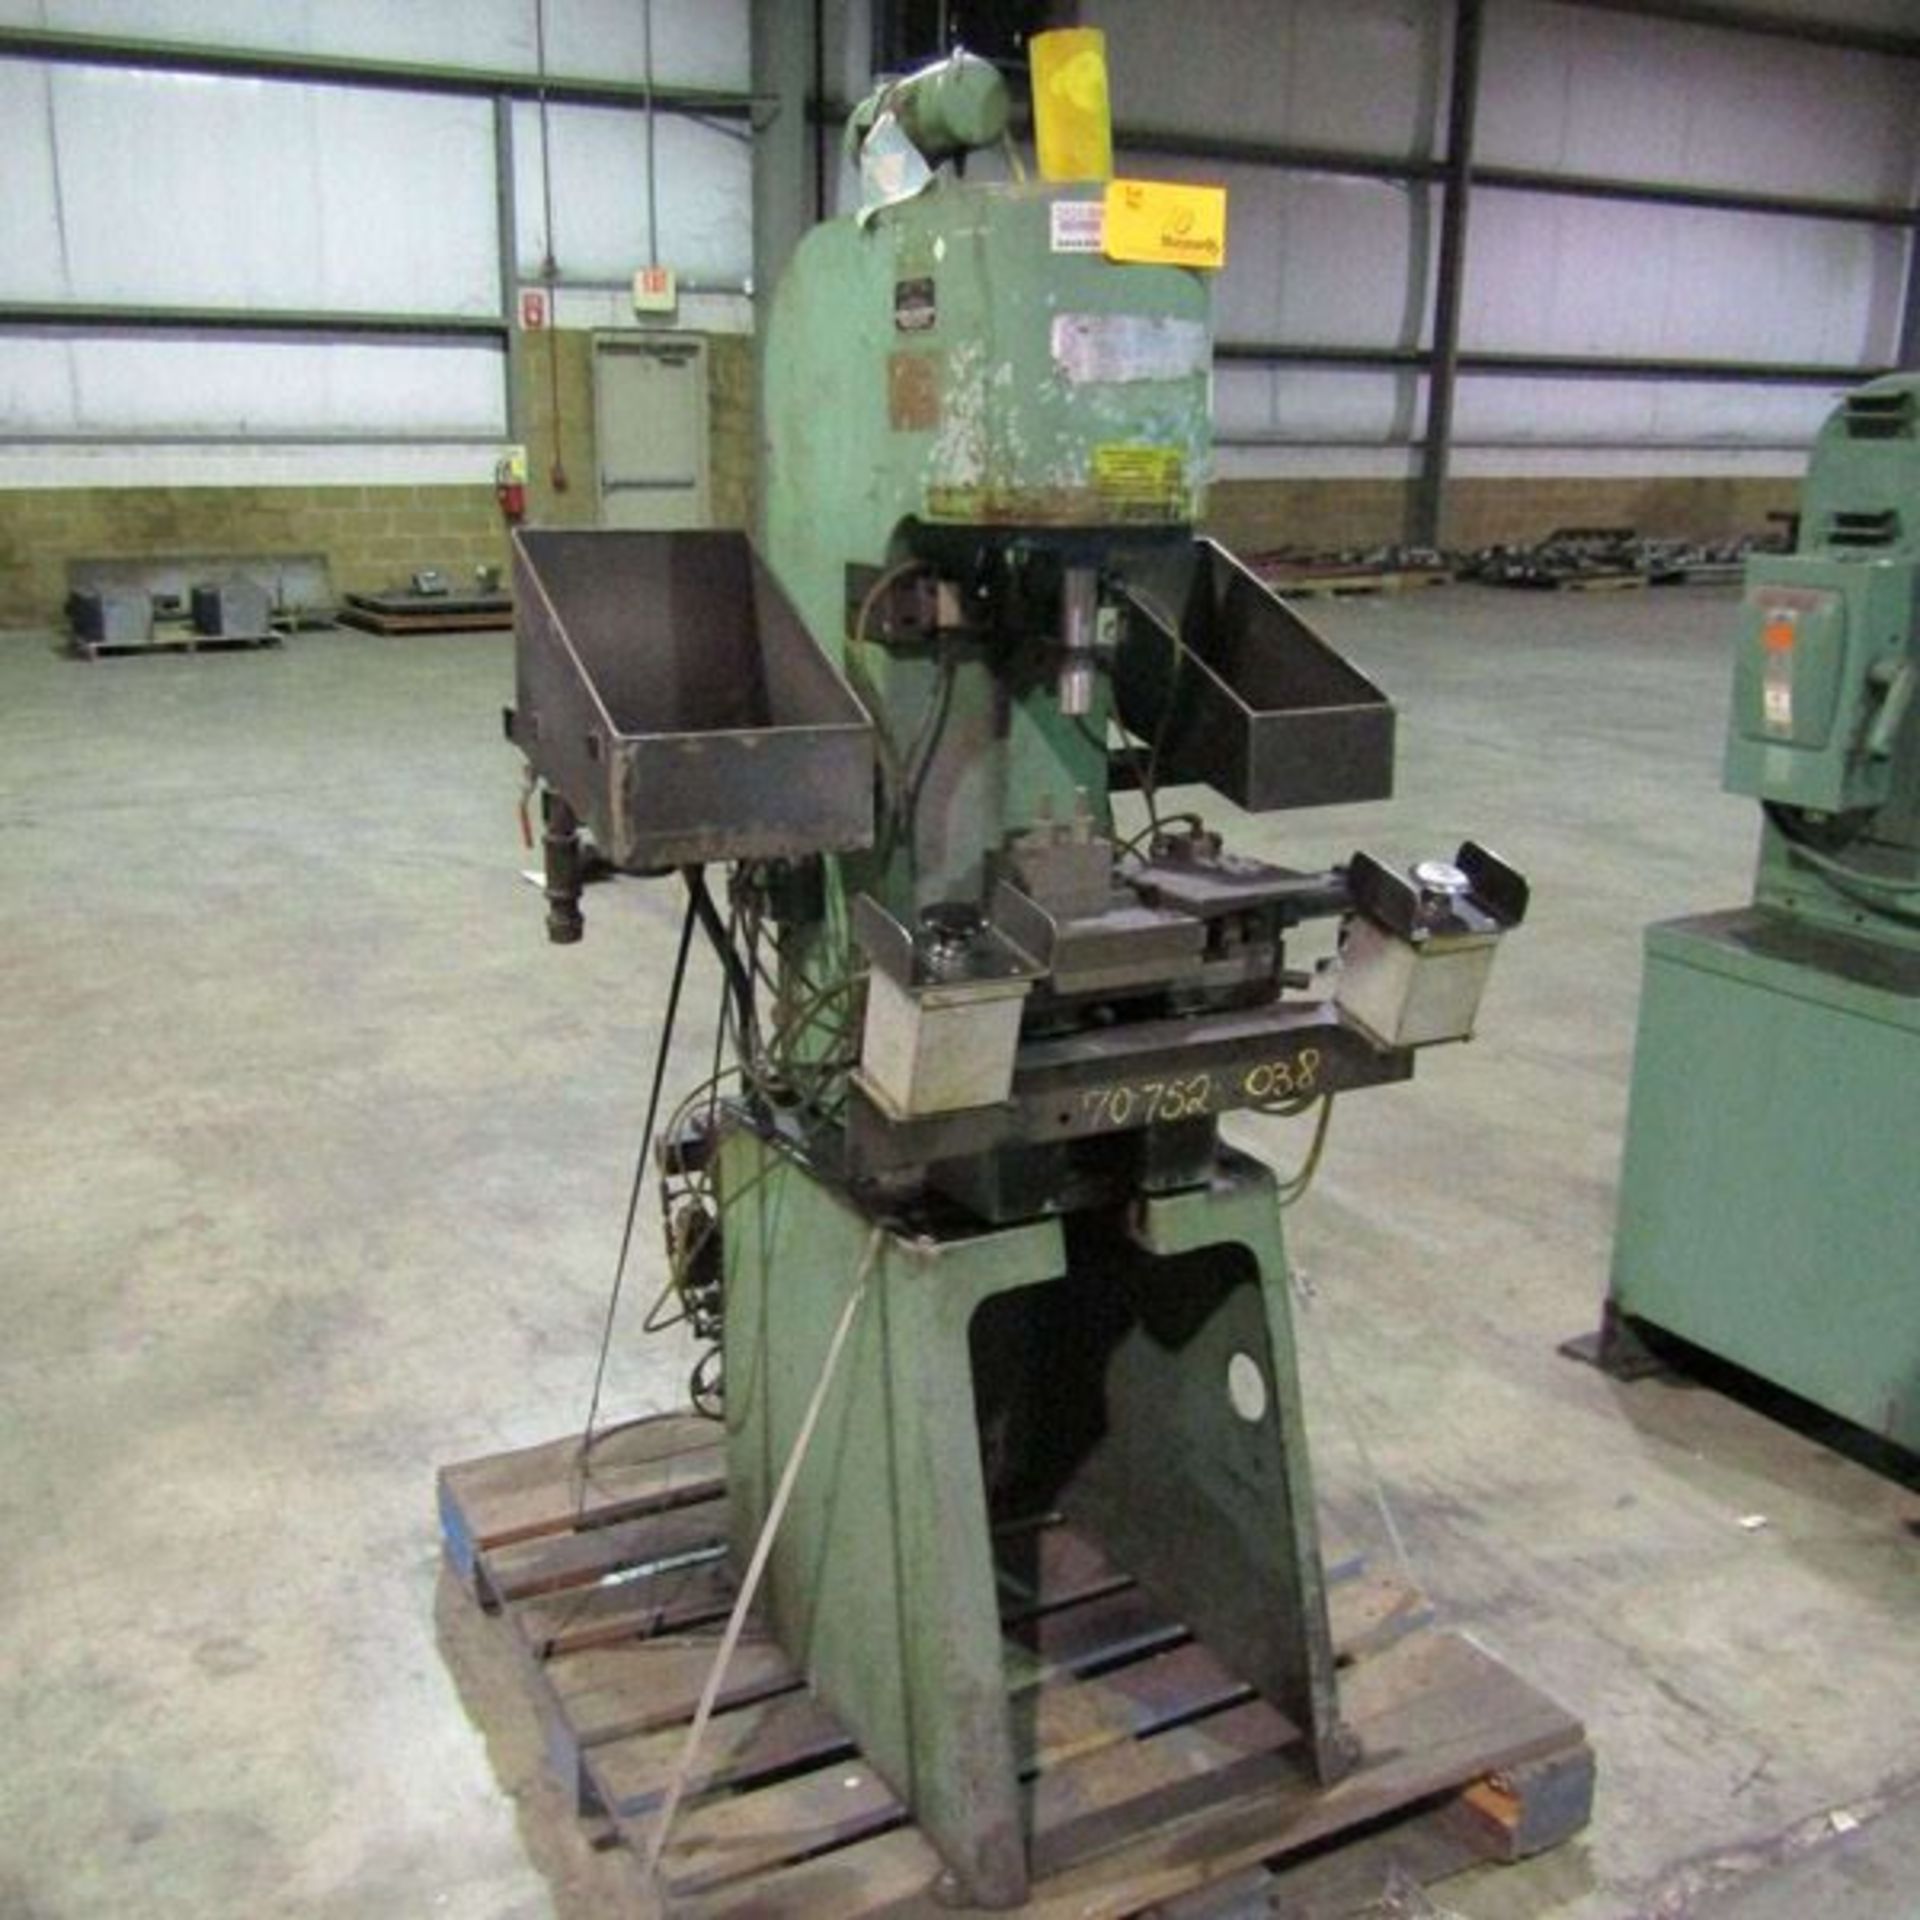 Air Hydraulics Air Over Oil C Frame Press 5.5 Ton x 14'' x 8''. LOADING FEE FOR THIS LOT: $200